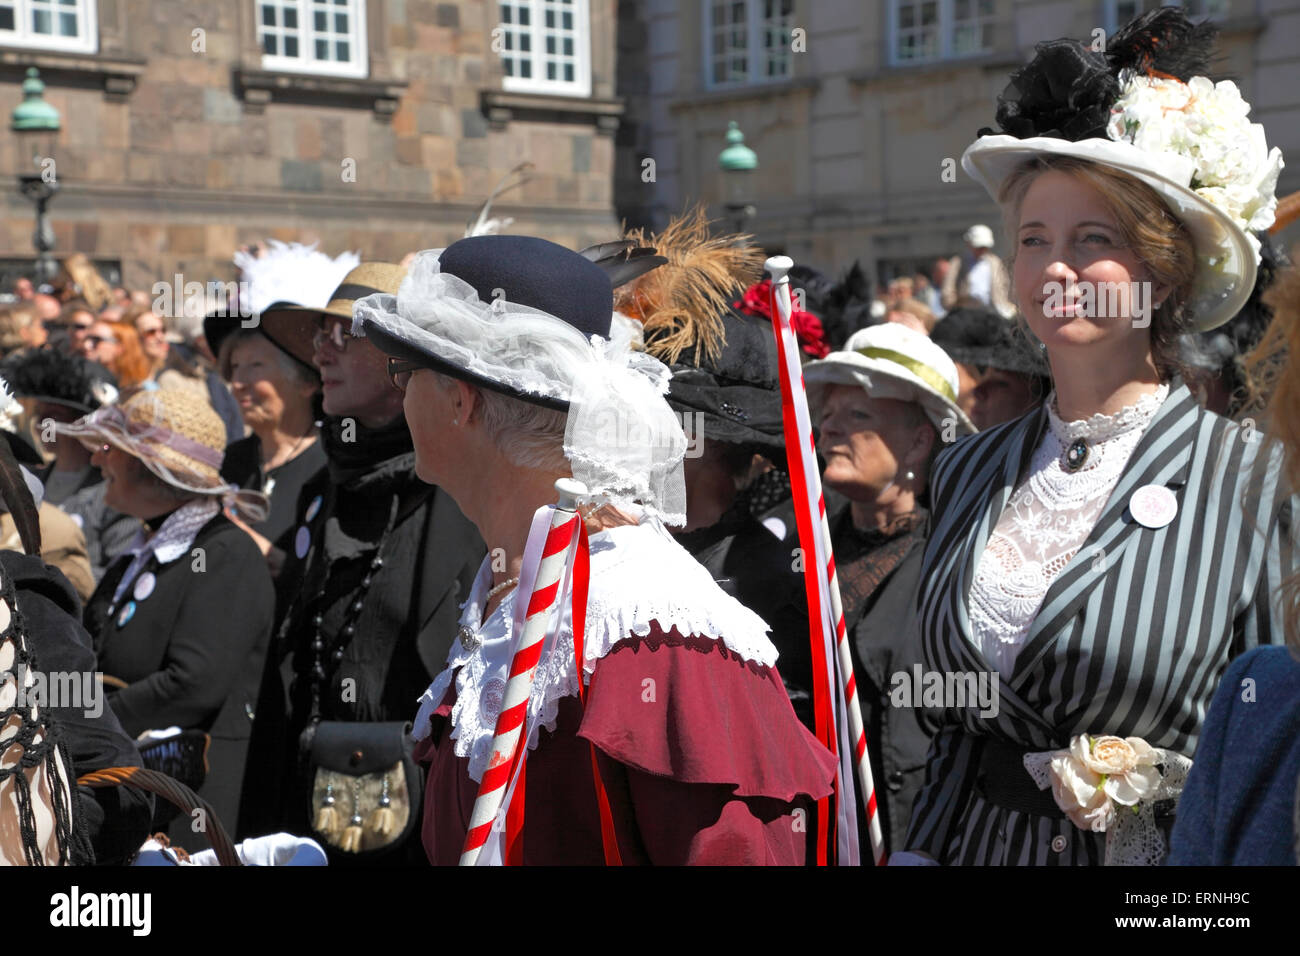 Copenhagen, Denmark, 5th June, 2015. The amendment of the Danish Constitution in 1915 gave Danish women the right to vote and stand for election. This important anniversary is celebrated in Copenhagen on the Constitution Day by the Government, the Parliament and the ongoing Distortion Festival in Copenhagen. A commemorative parade takes place very similar to the original one in 1915, many of the participants are in historic garments. This is at the finish point of the parade in the Christiansborg Palace Yard before the official speeches. Credit:  Niels Quist/Alamy Live News Stock Photo